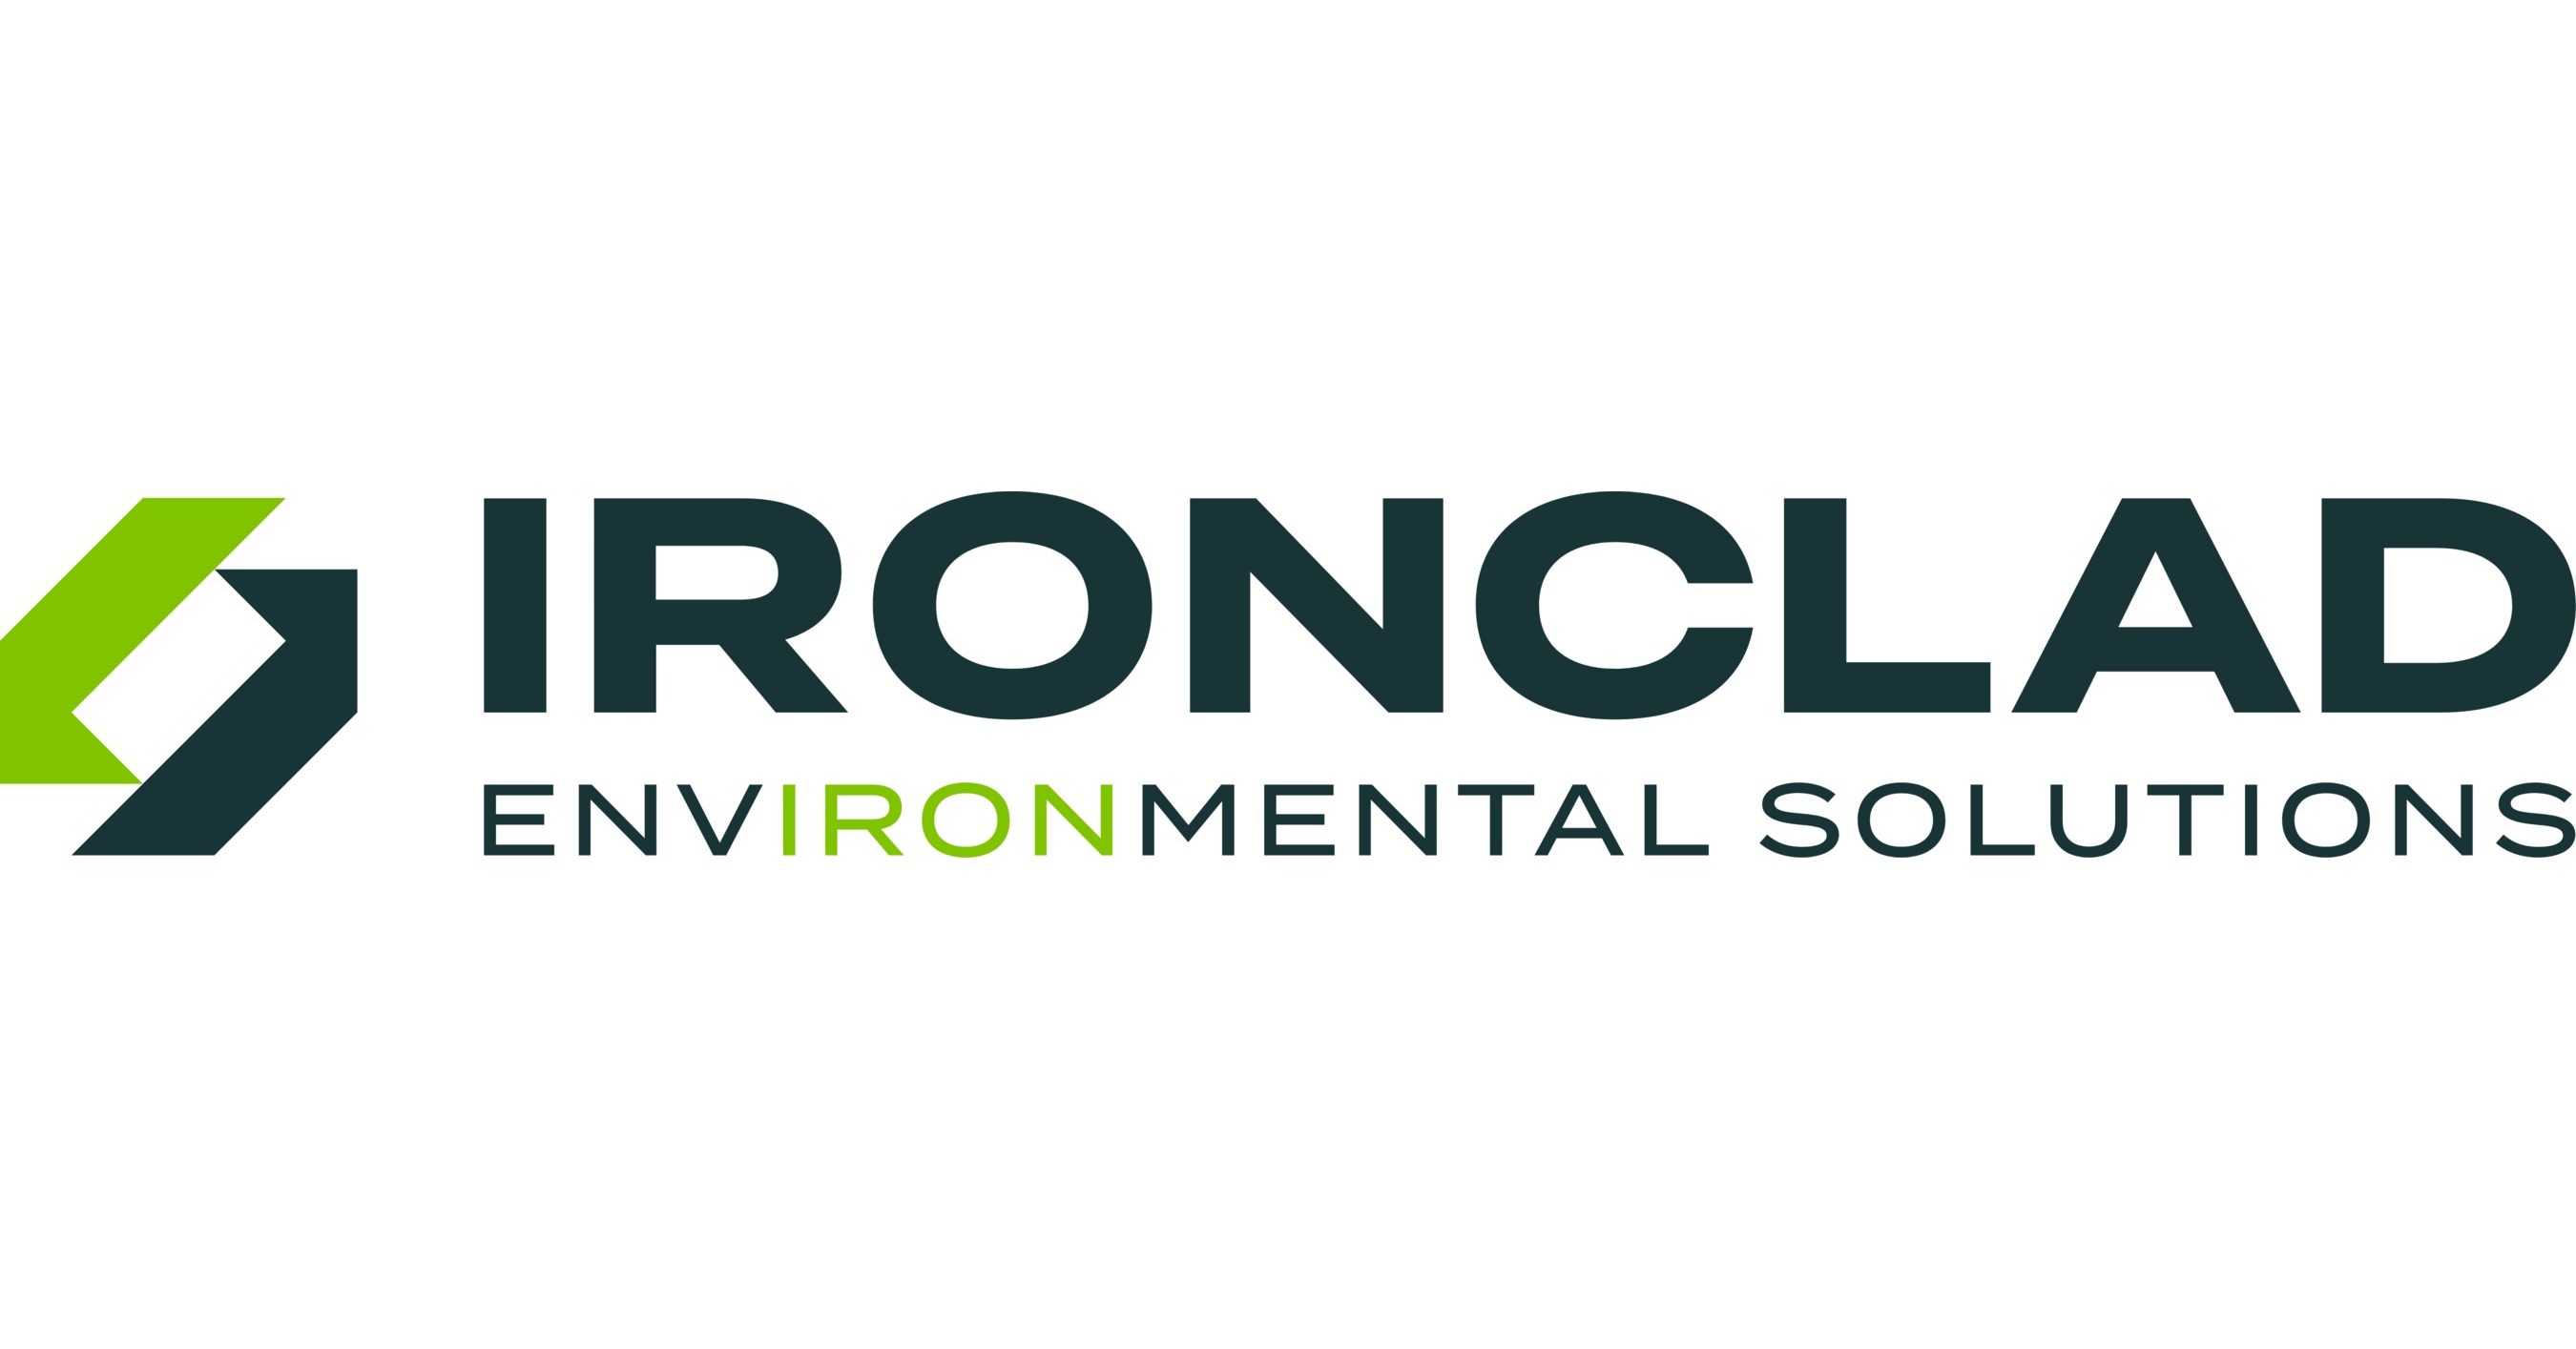 Ironclad Environmental Solutions